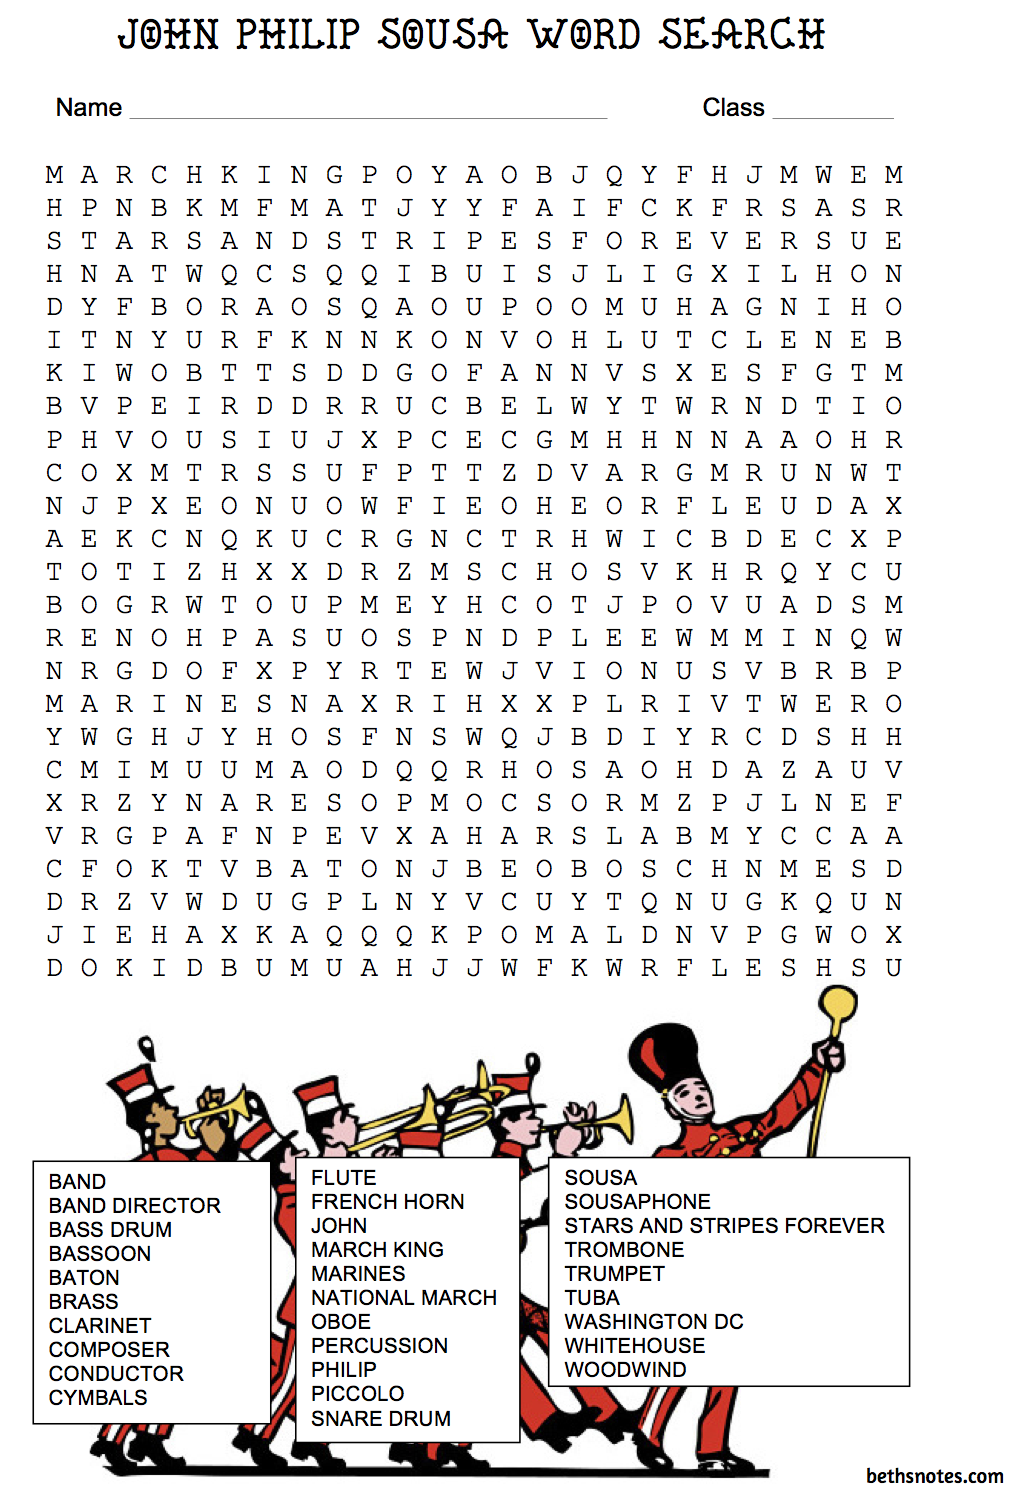 Word searches - Beth's Notes